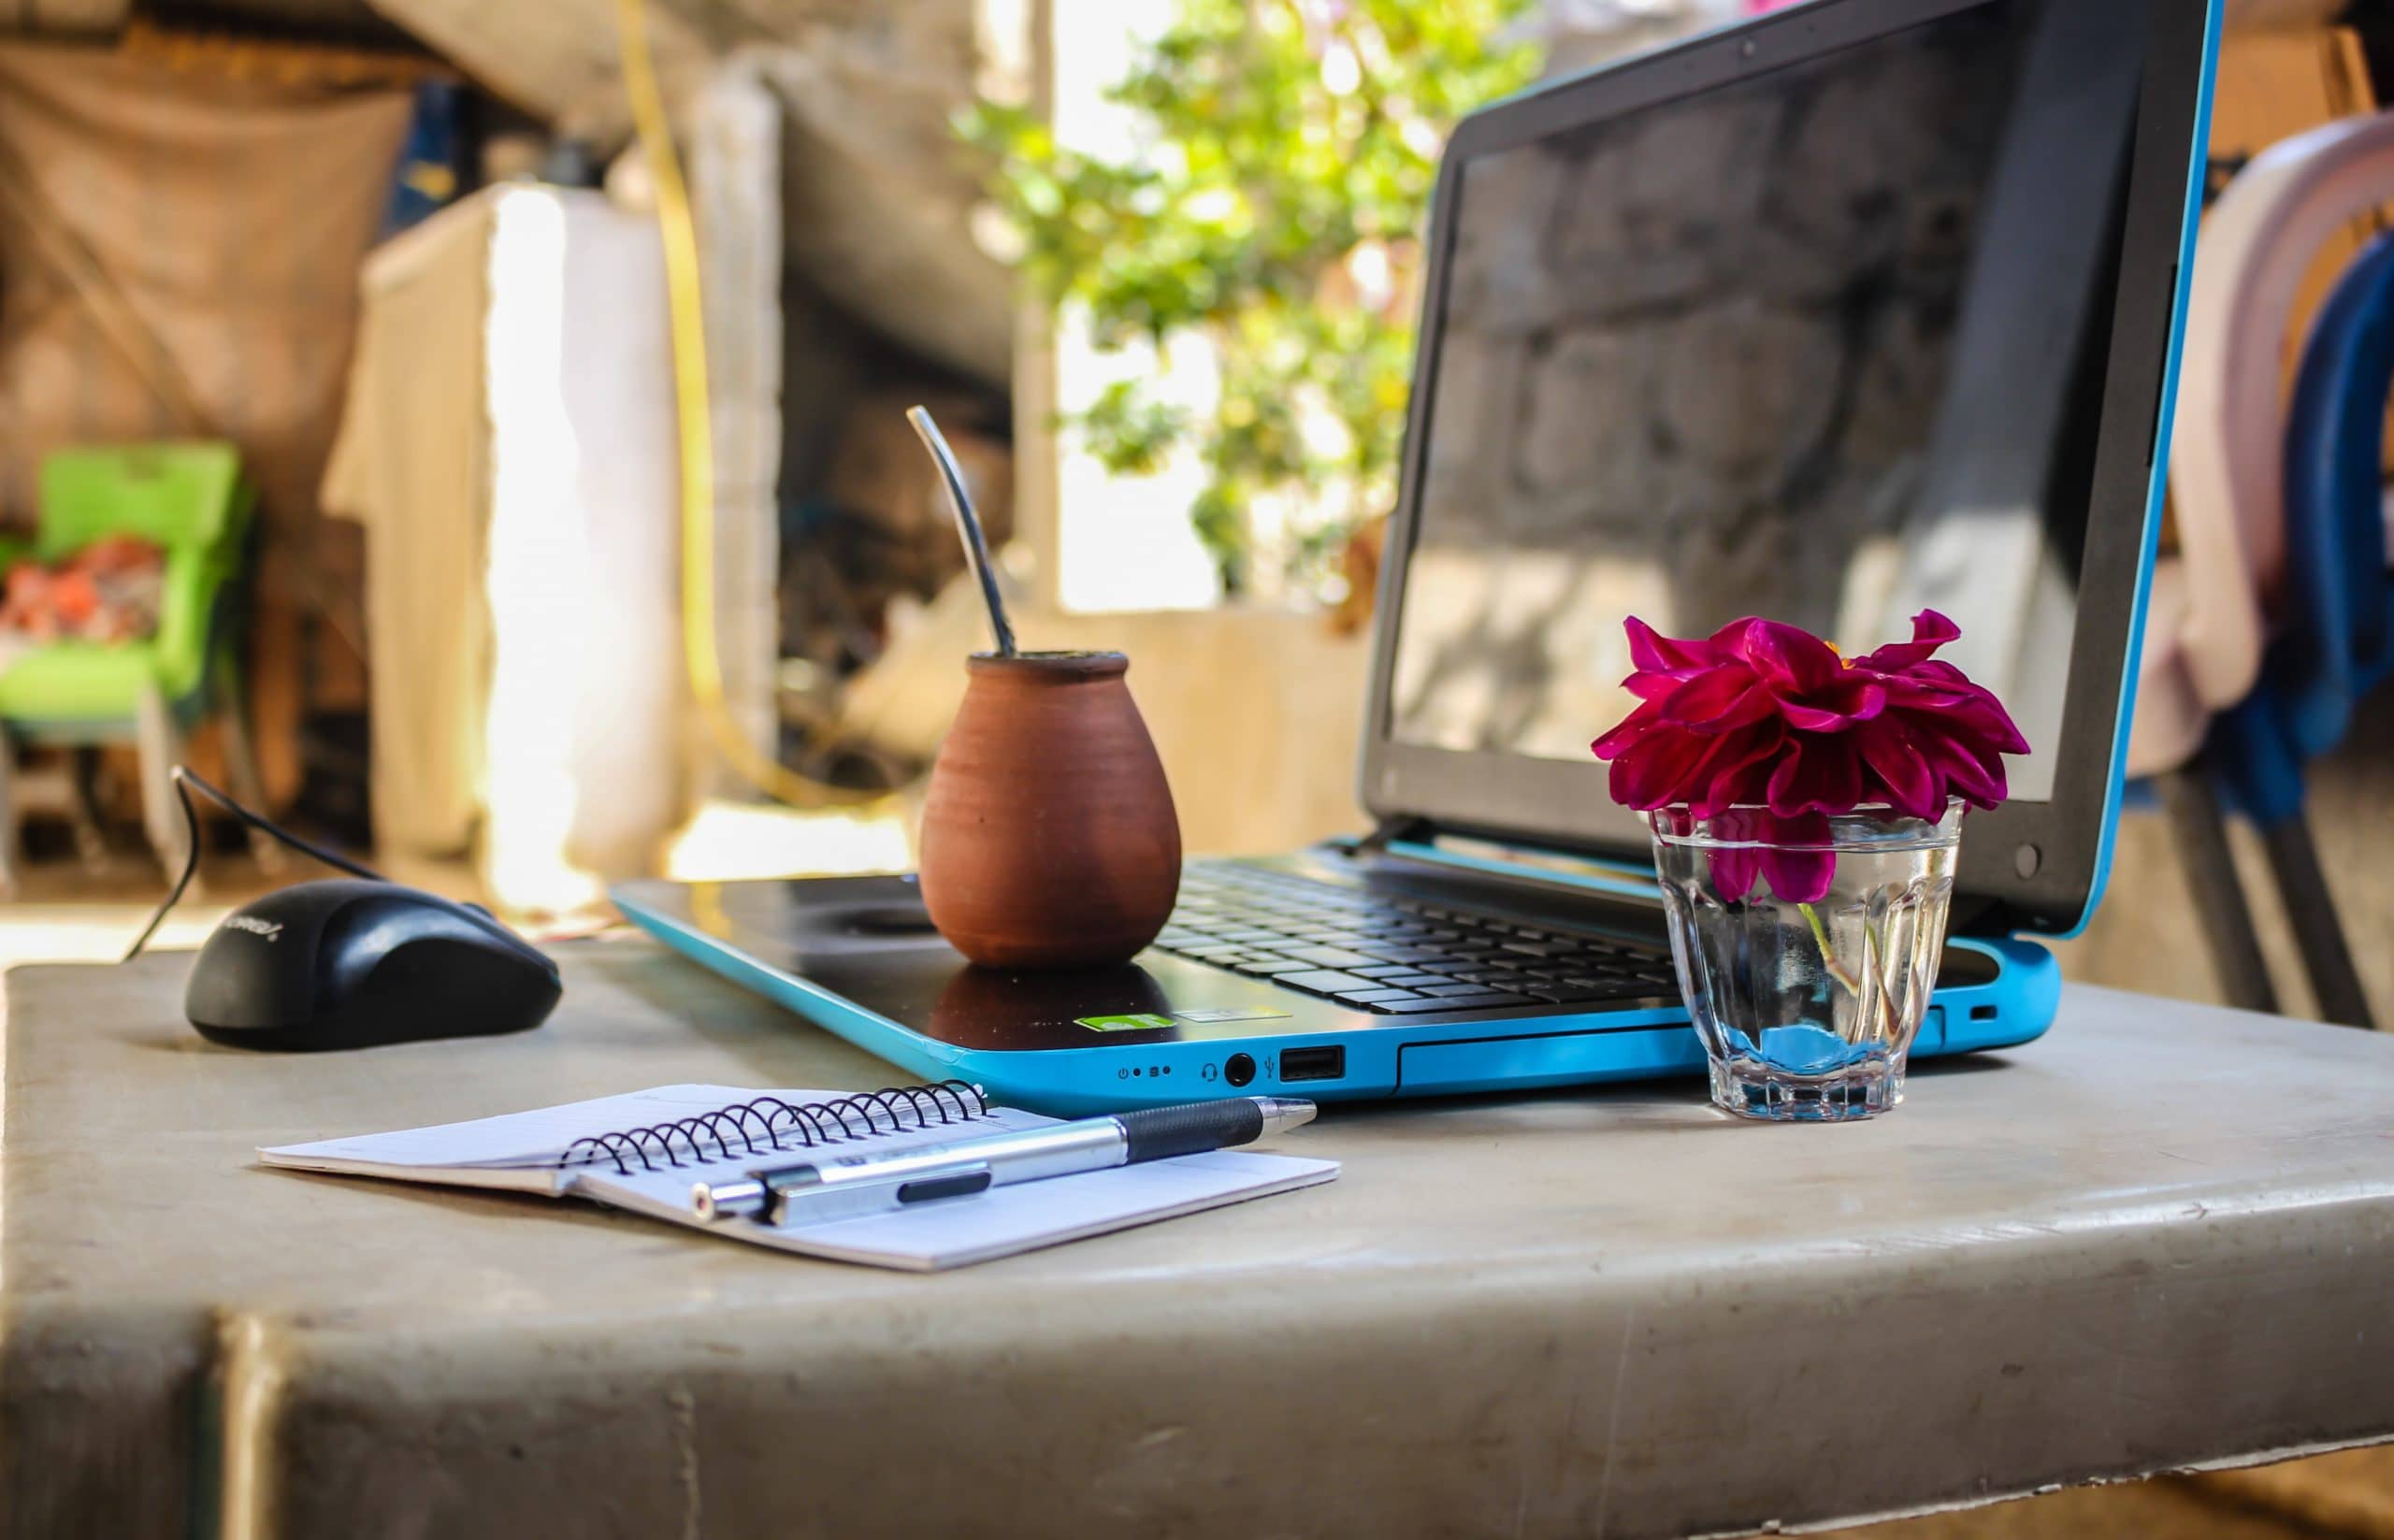 How To Become A Digital Nomad